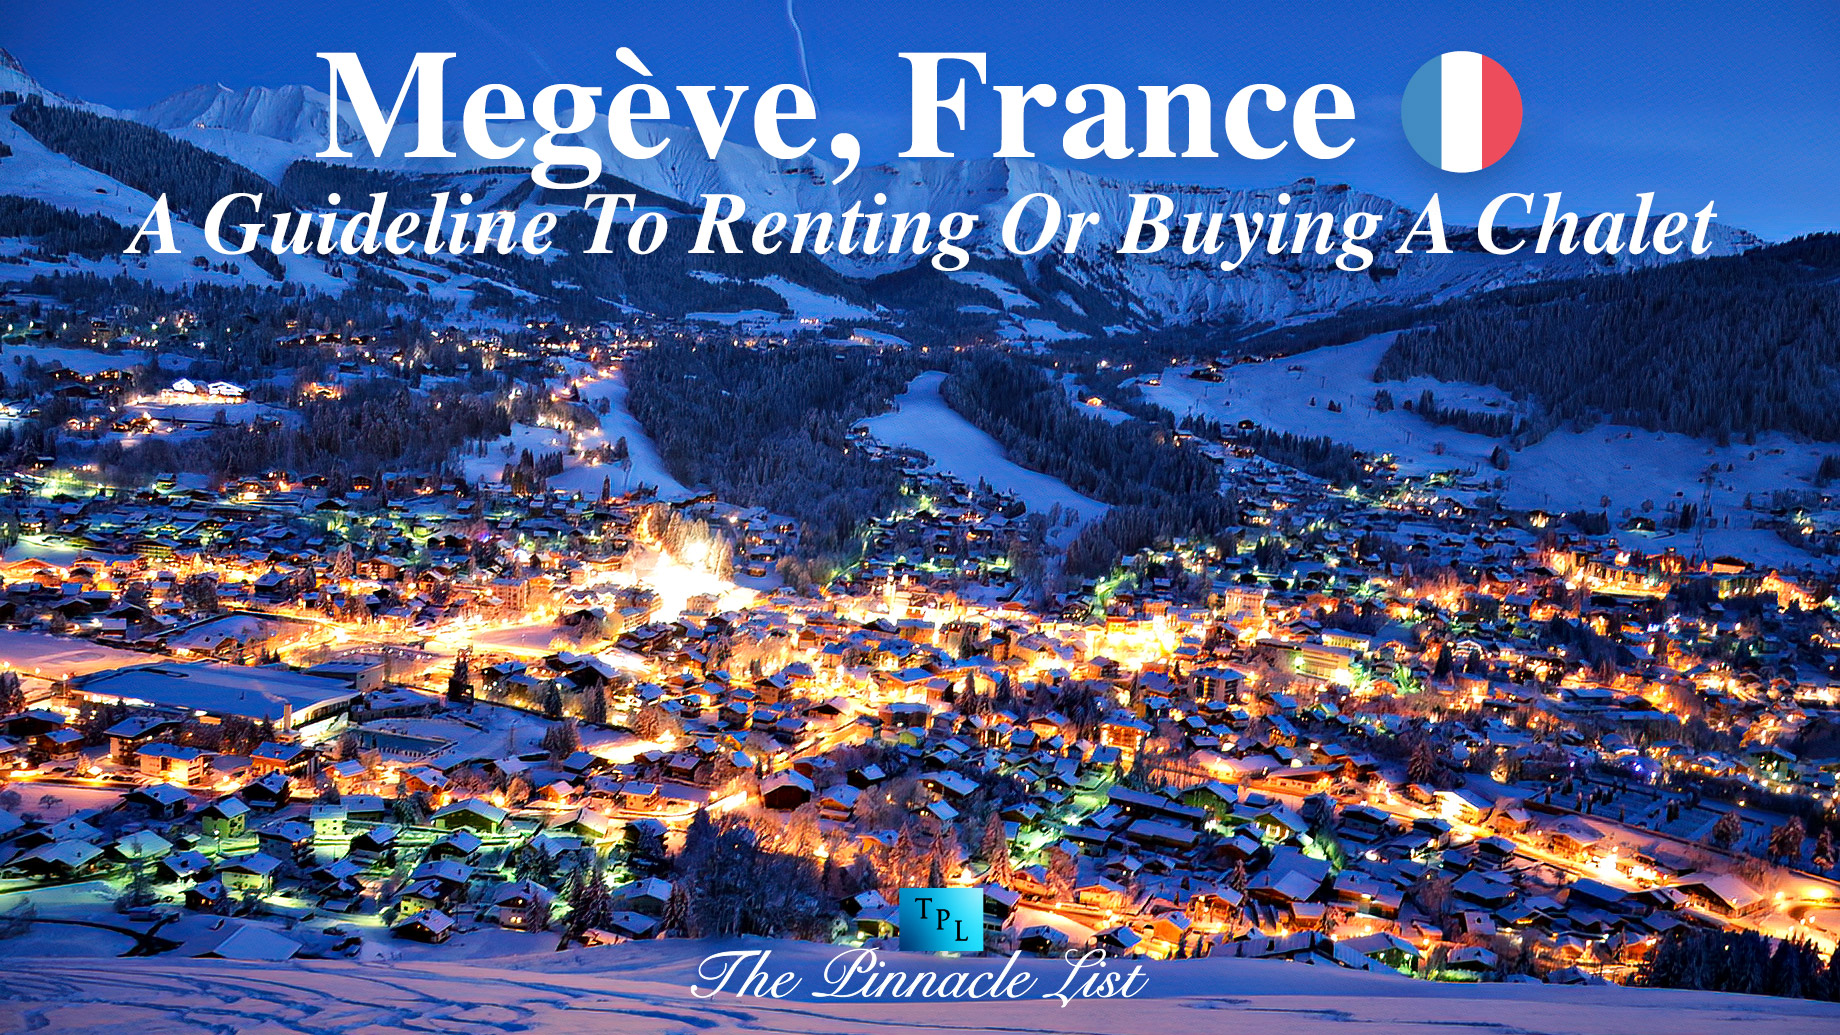 A Guideline To Renting Or Buying A Chalet In Megève, France